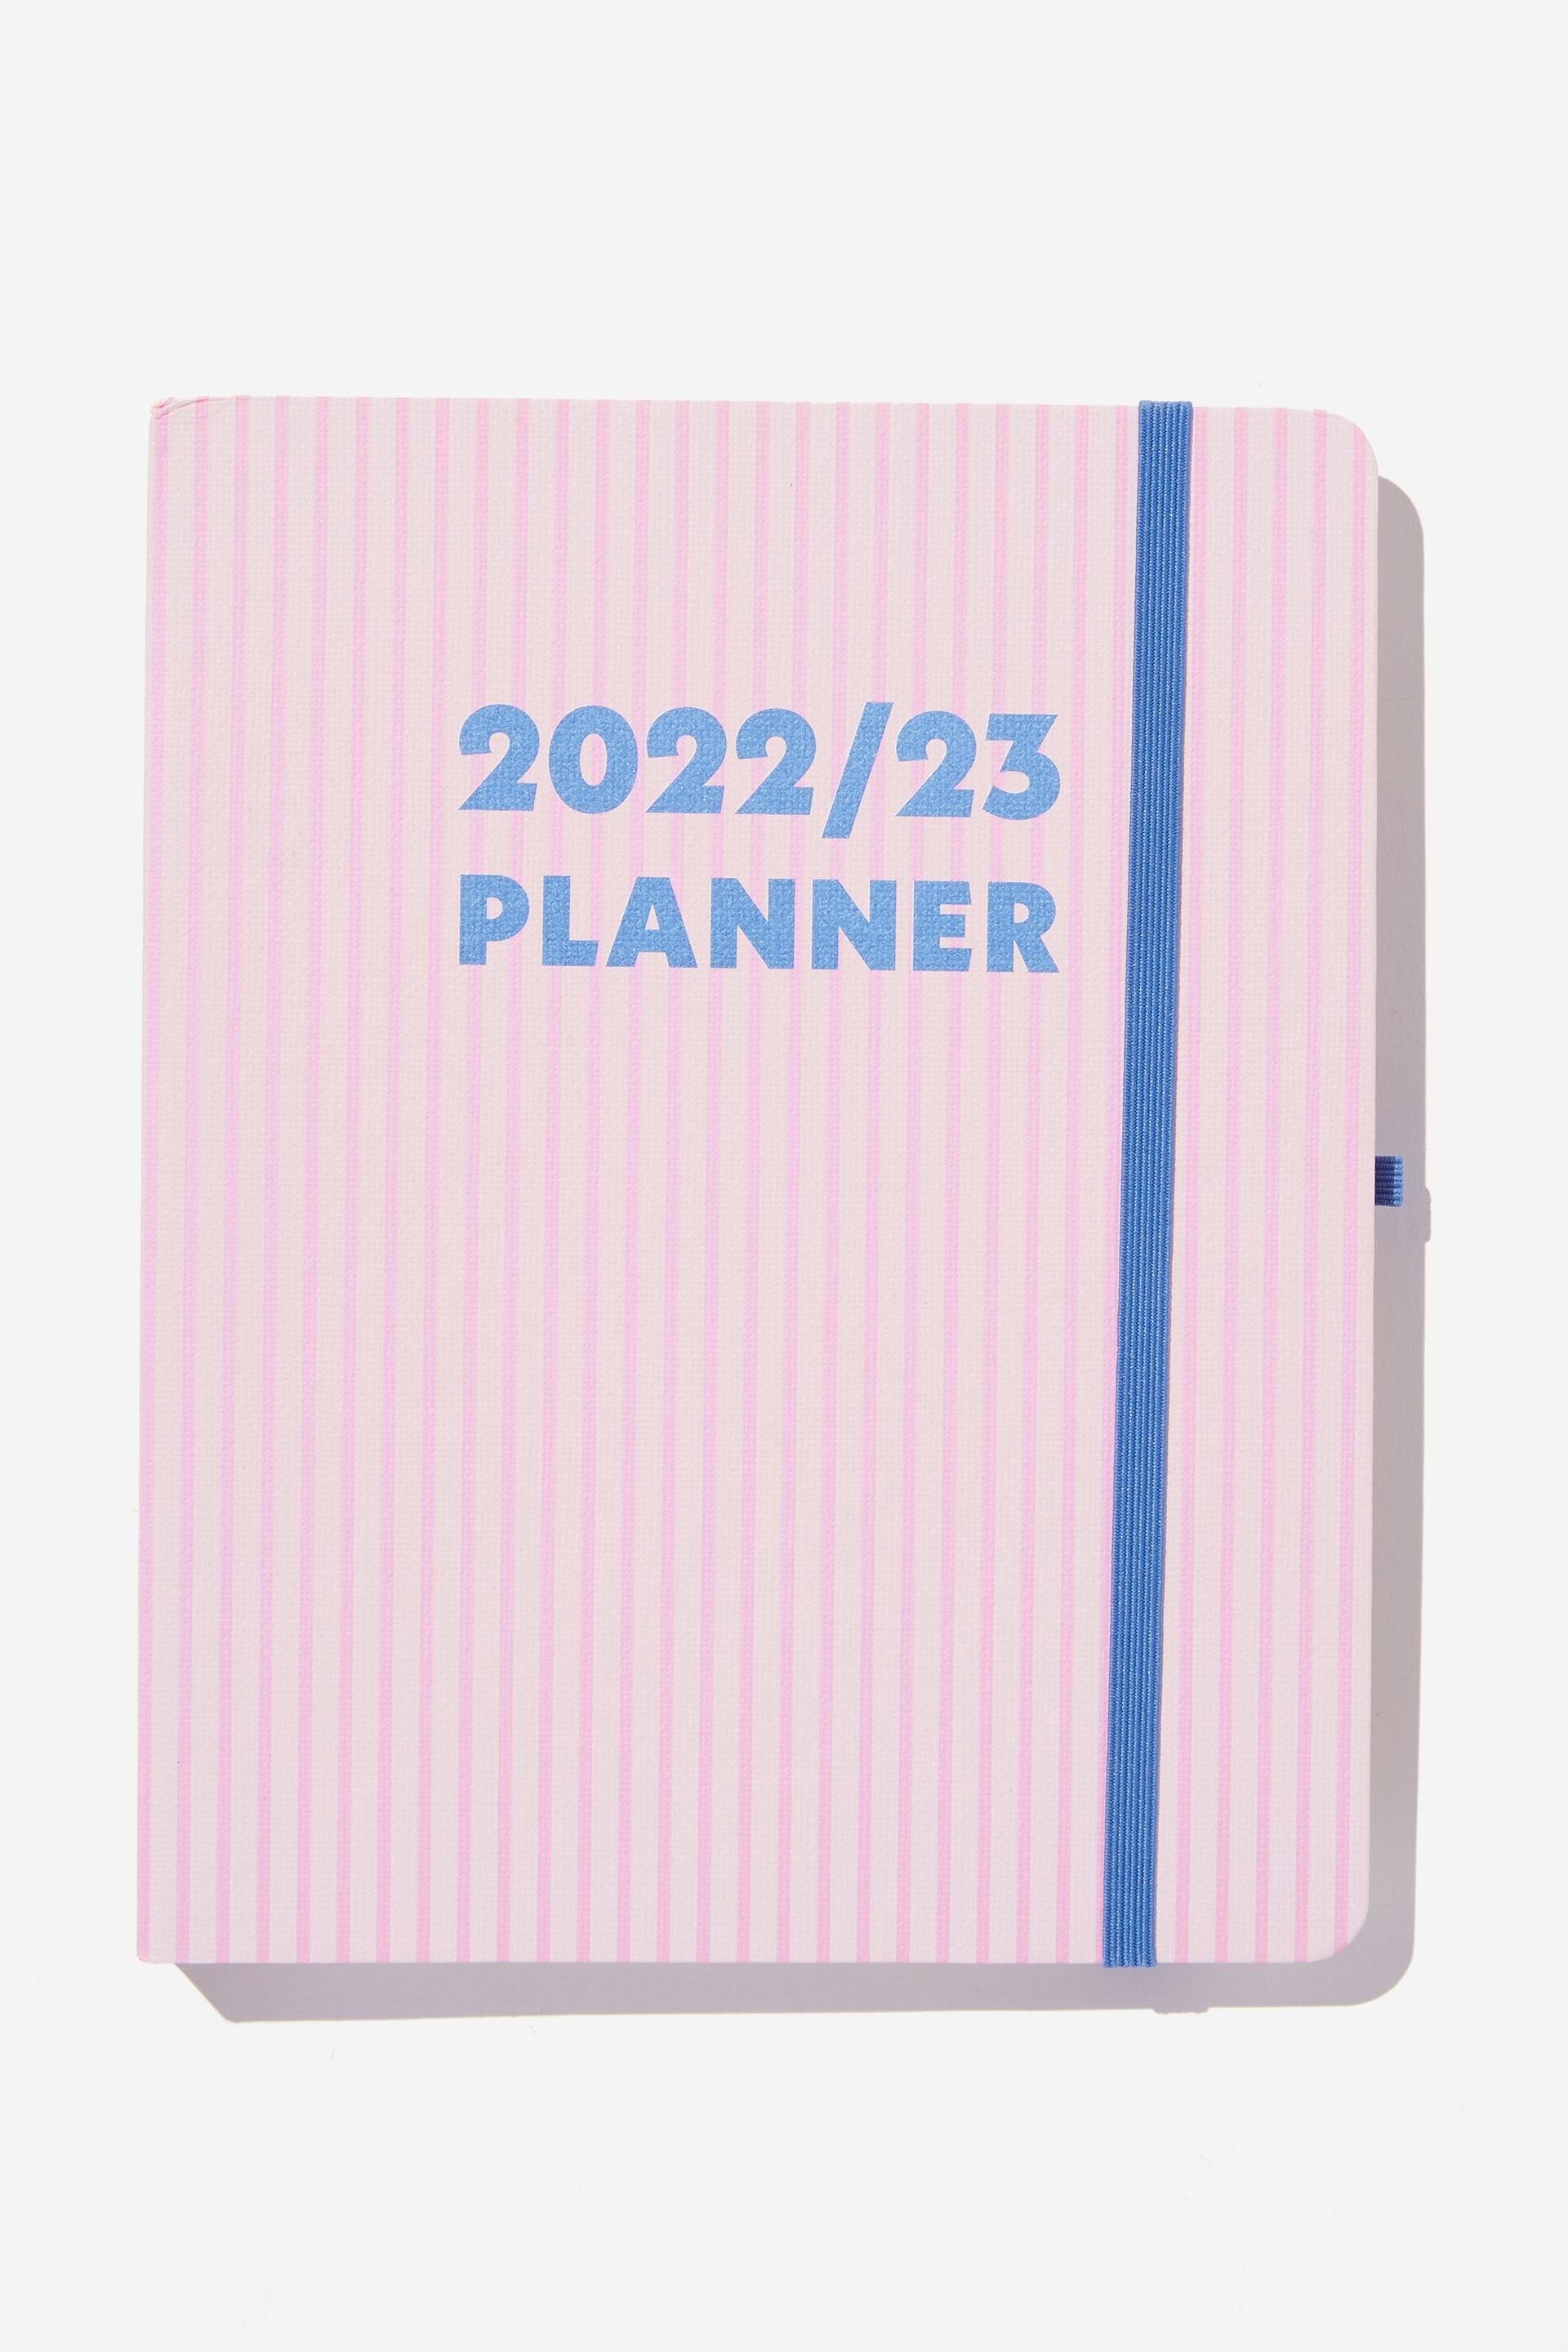 Typo - Mid Year Planner 2022 23 - Parker stripe pink and blue